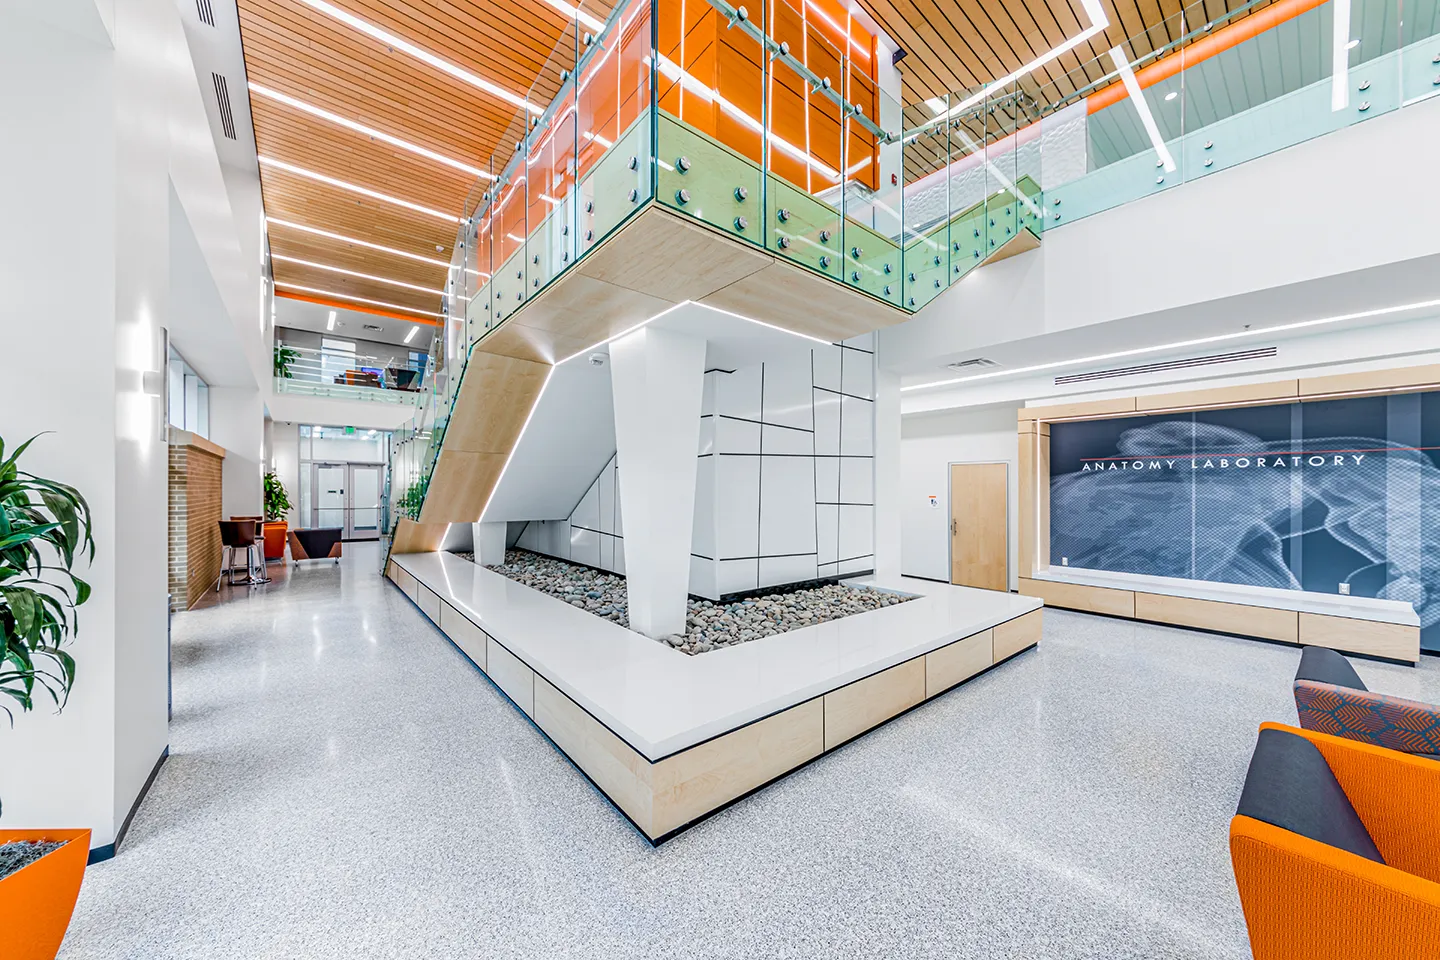 The interior design incorporates biophilic advantages of natural light, accessibility, acoustics, clean air, and other wellness amenities, such as the central stair focal point enticing users to bypass the elevator.